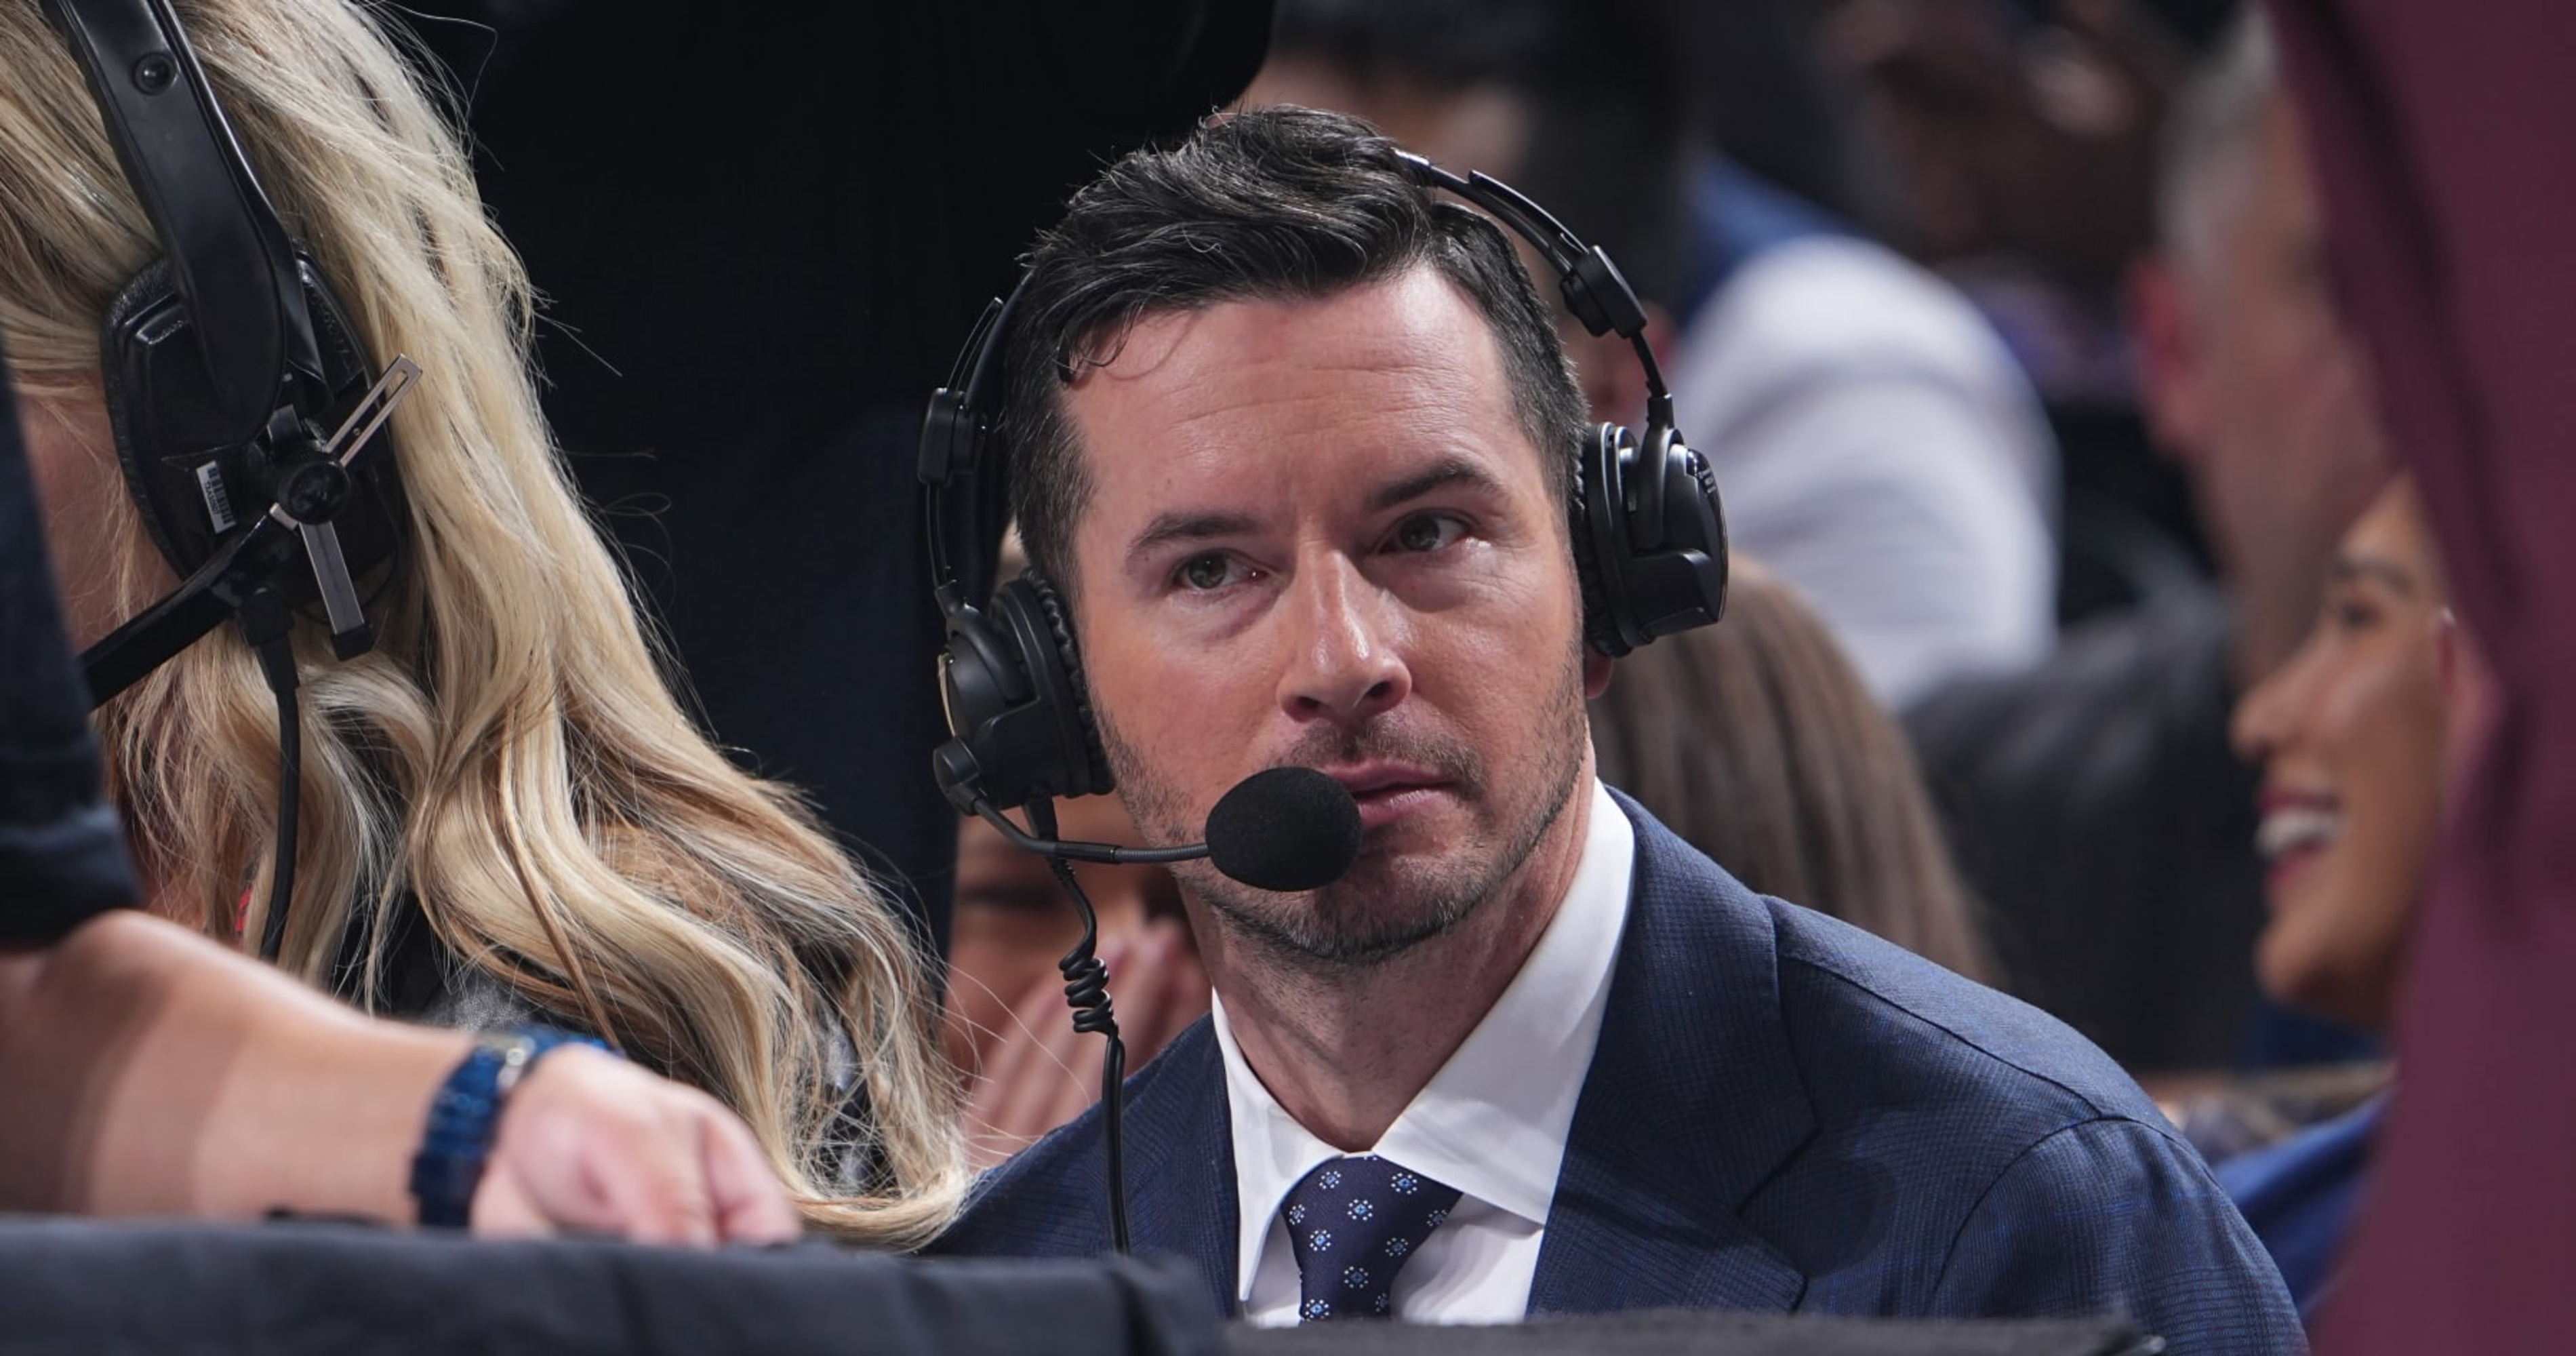 JJ Redick Named New Head Coach of the Los Angeles Lakers: NBA Analyst Brings Unique Perspective and Strong Basketball IQ to the Table